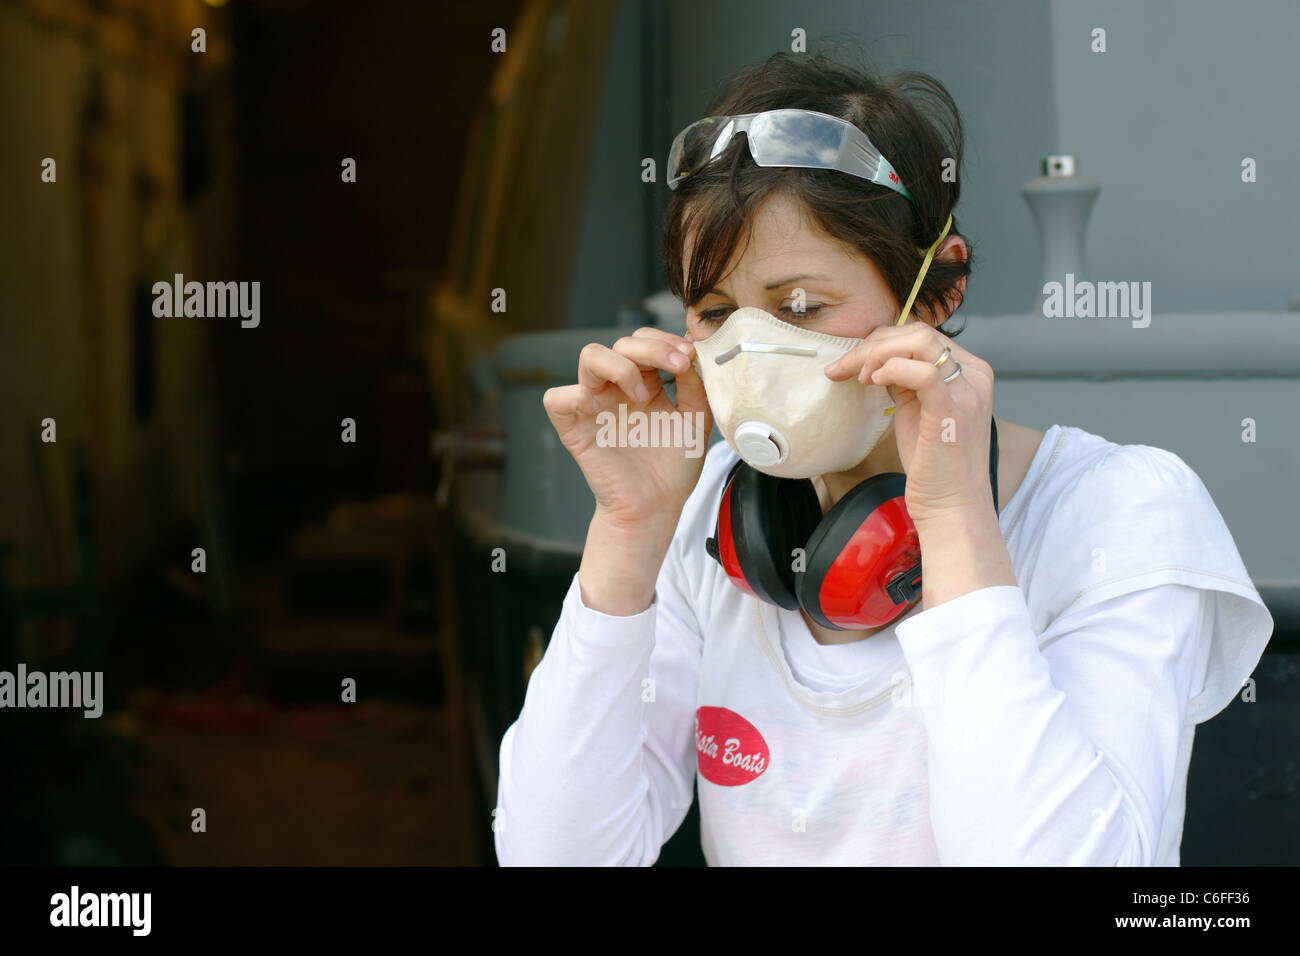 A young woman putting on a face mask, ear defenders and safety goggles for protection whilst working. Stock Photo